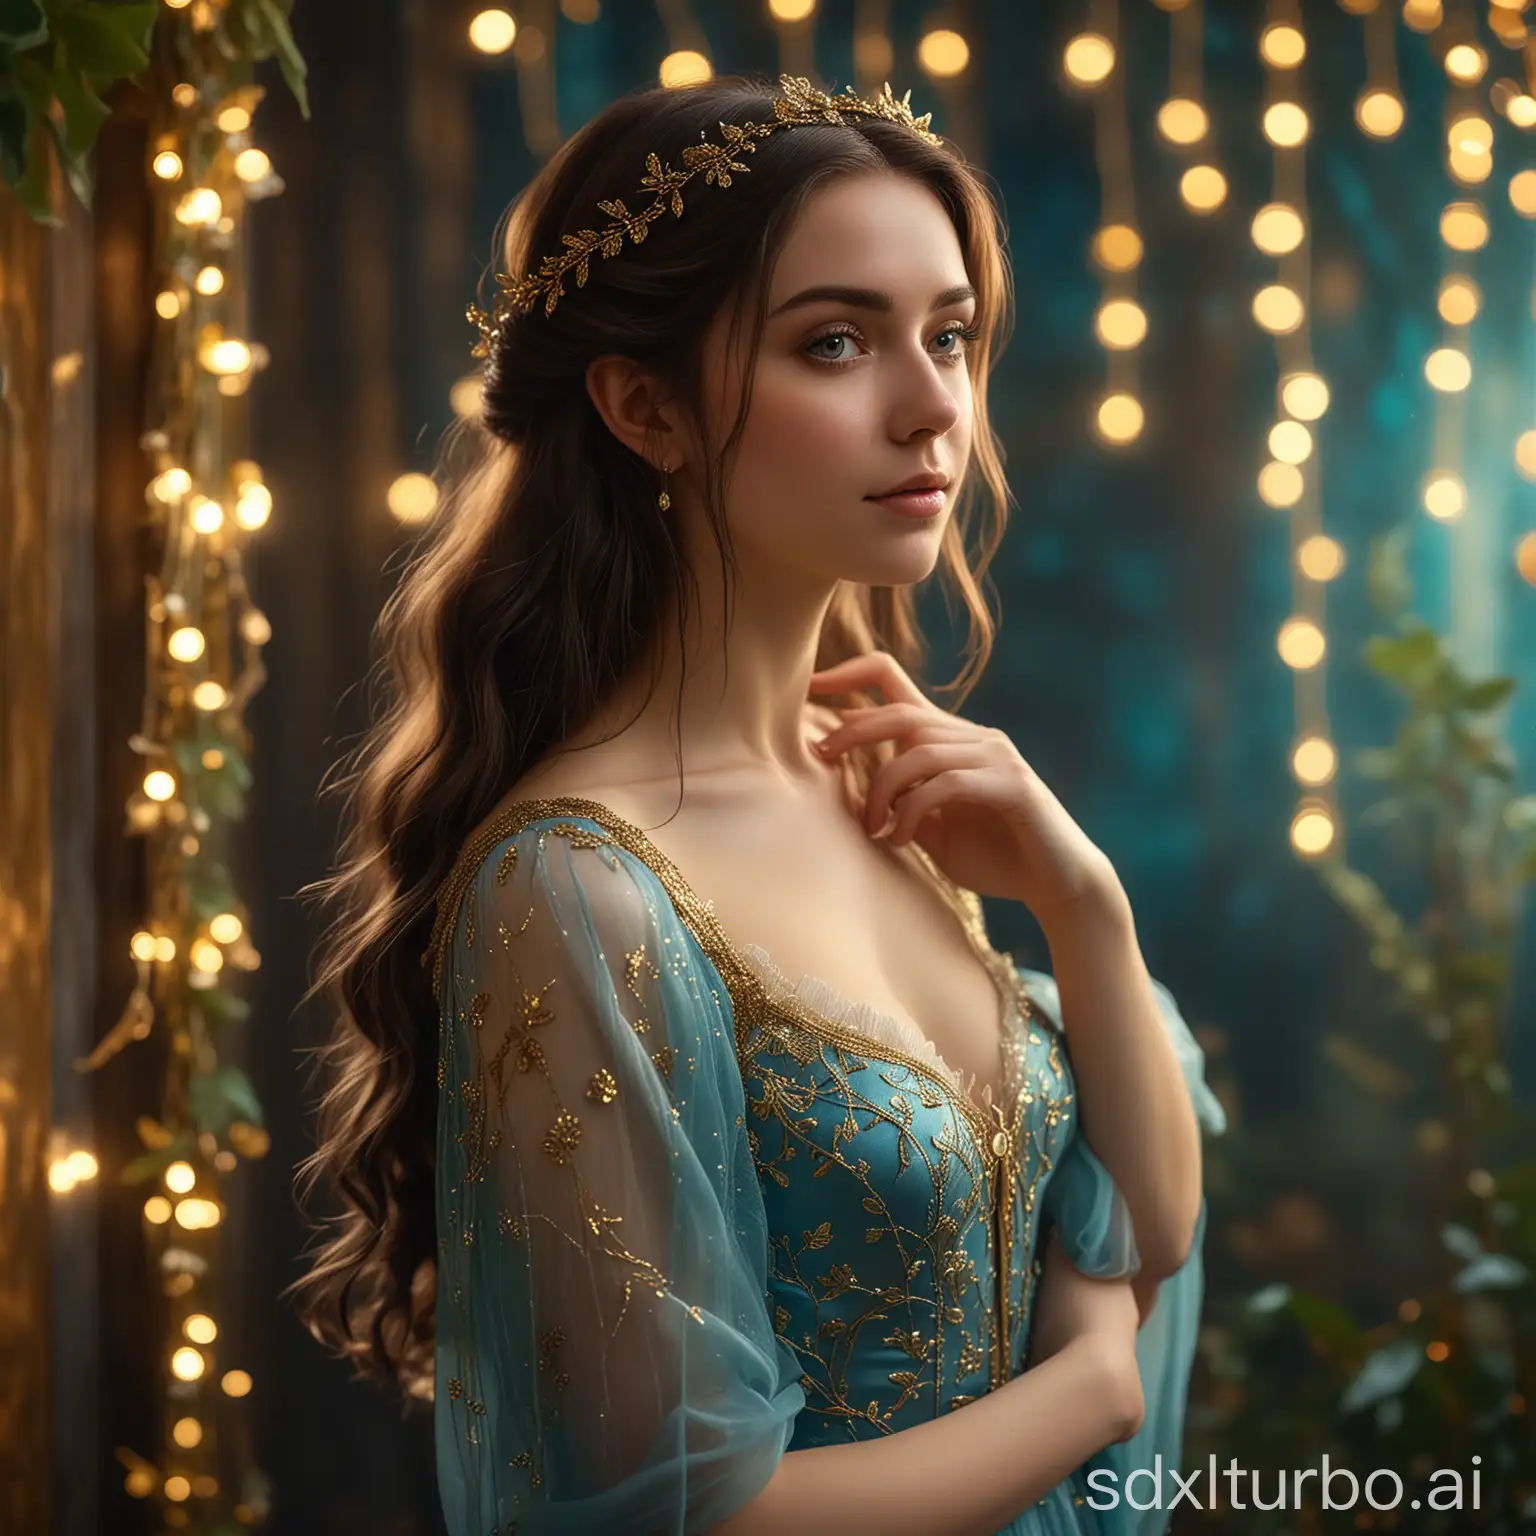 Enchanting-Young-Woman-in-Ethereal-Fantasy-Garden-Gold-Leaf-Art-and-Fairy-Lights